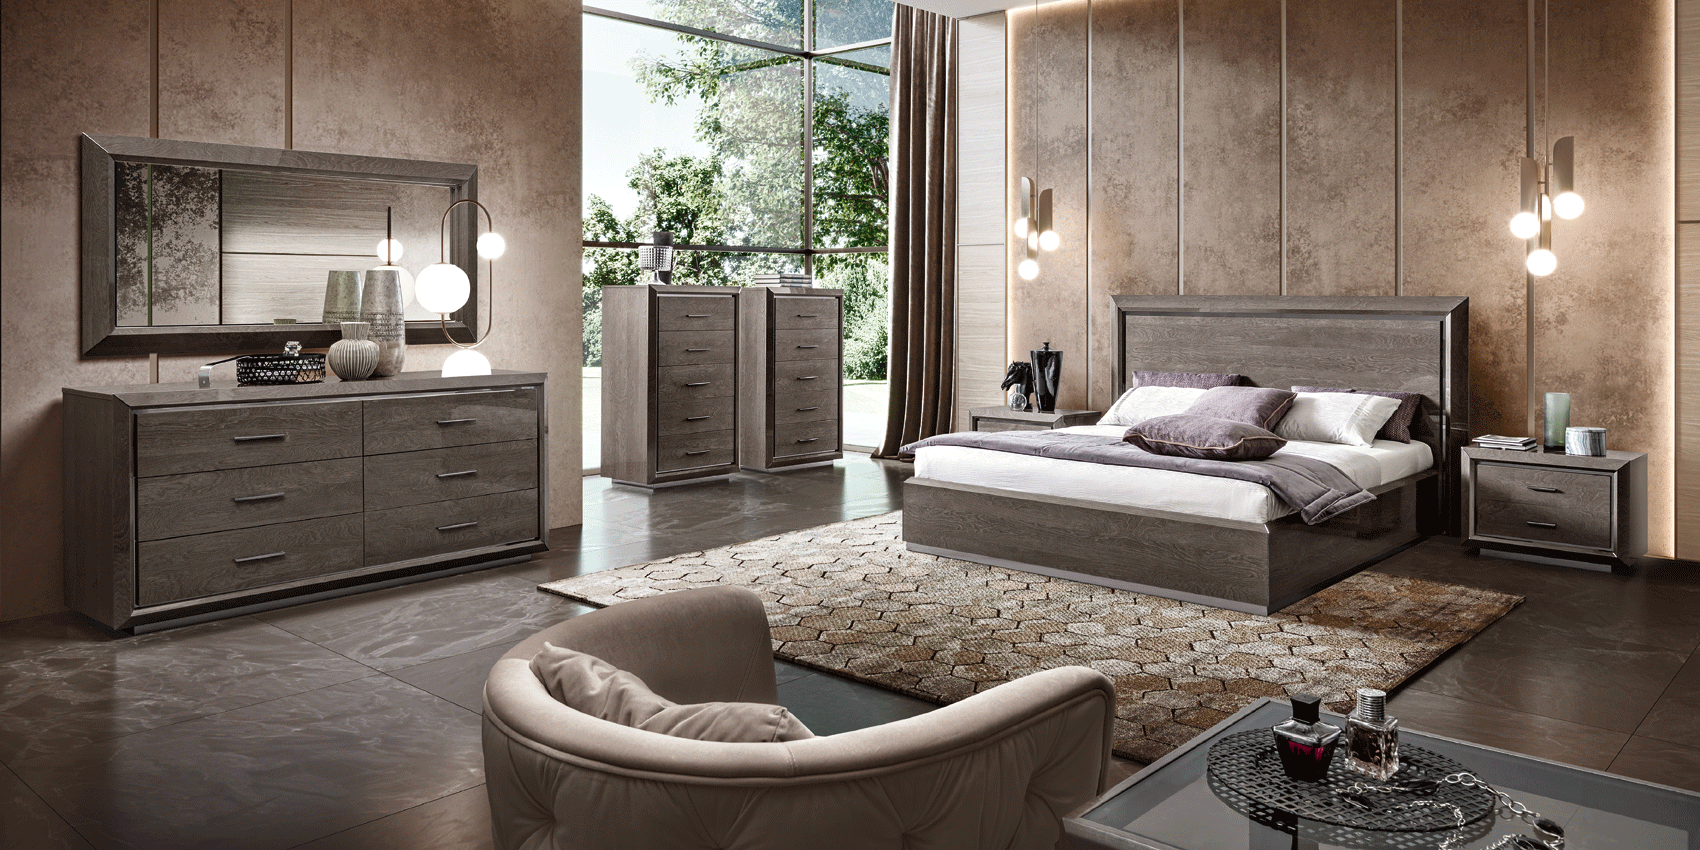 Bedroom Furniture Modern Bedrooms QS and KS Elite Night "LEGNO" Additional Items